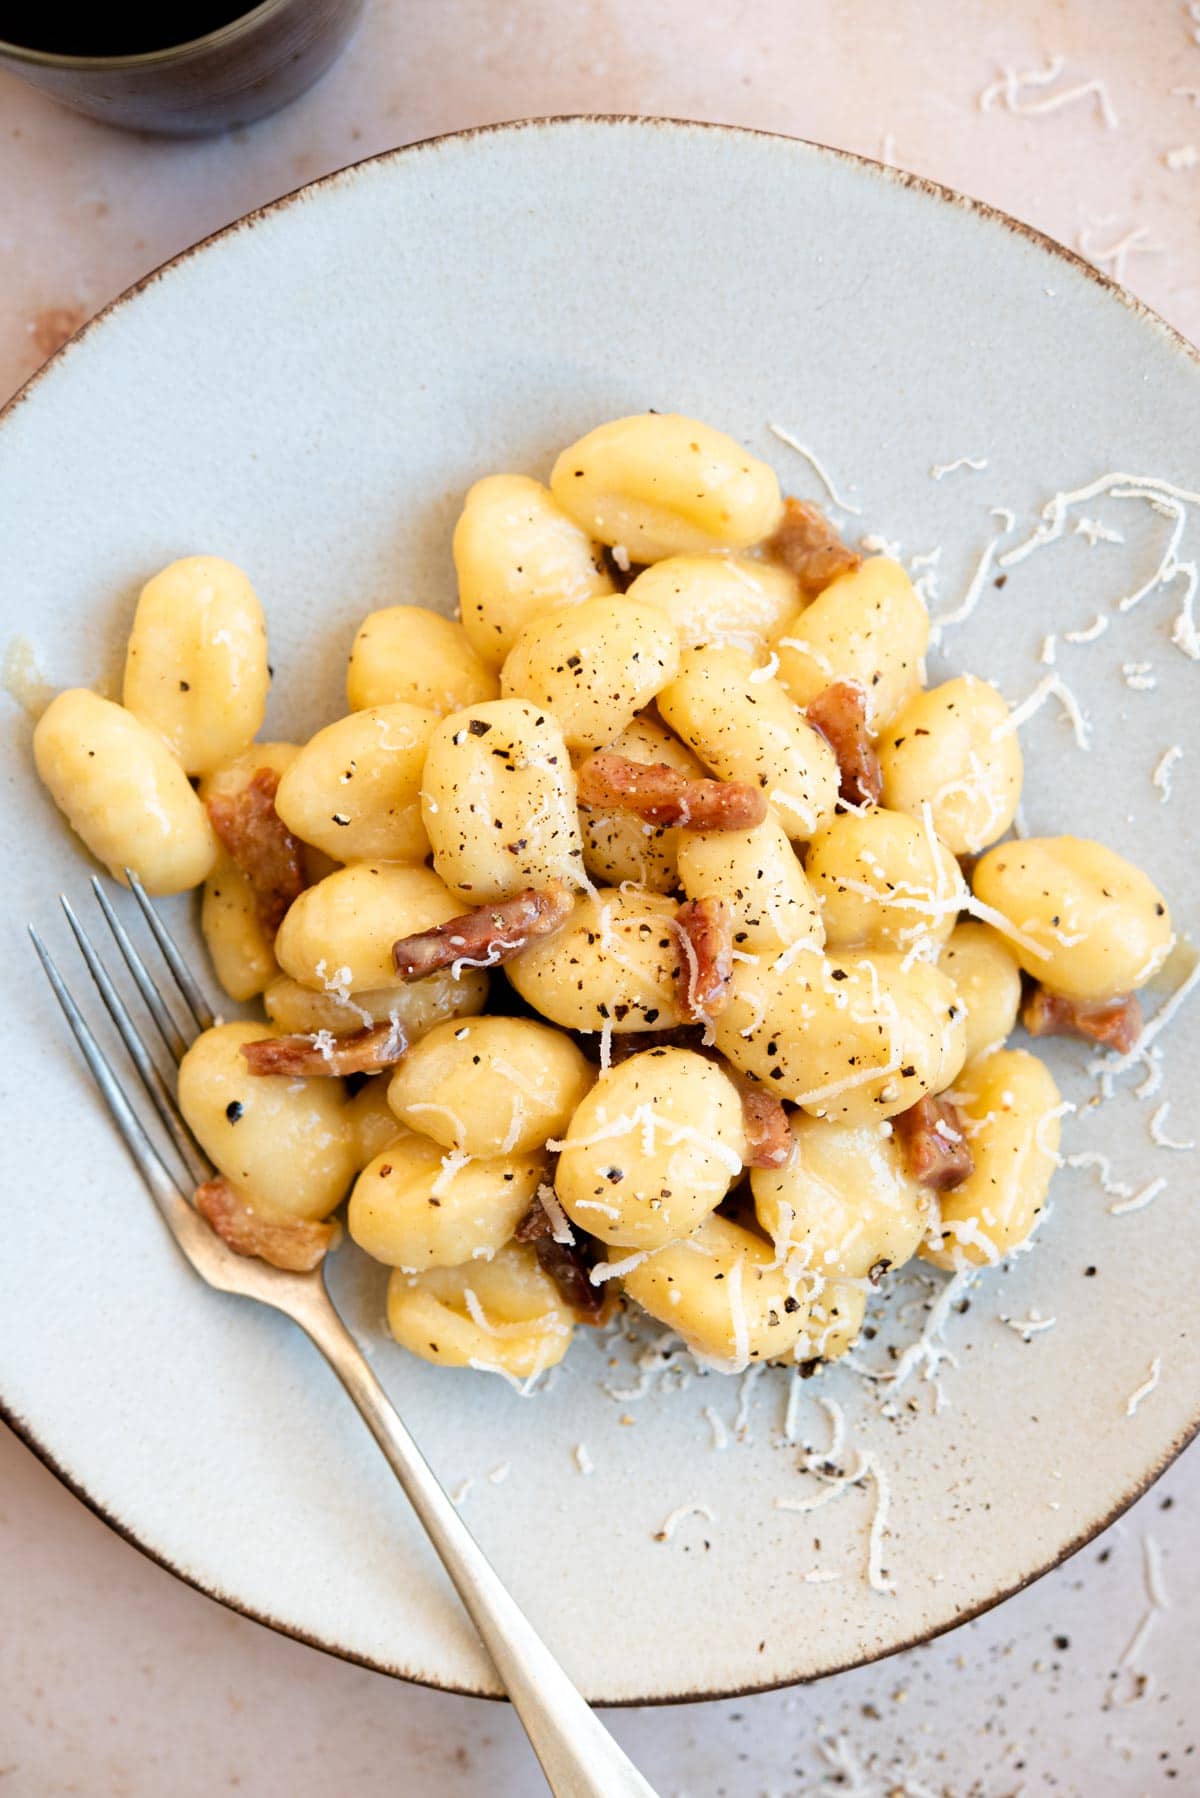 An overhead shot of a plate of gnocchi with carbonara sauce